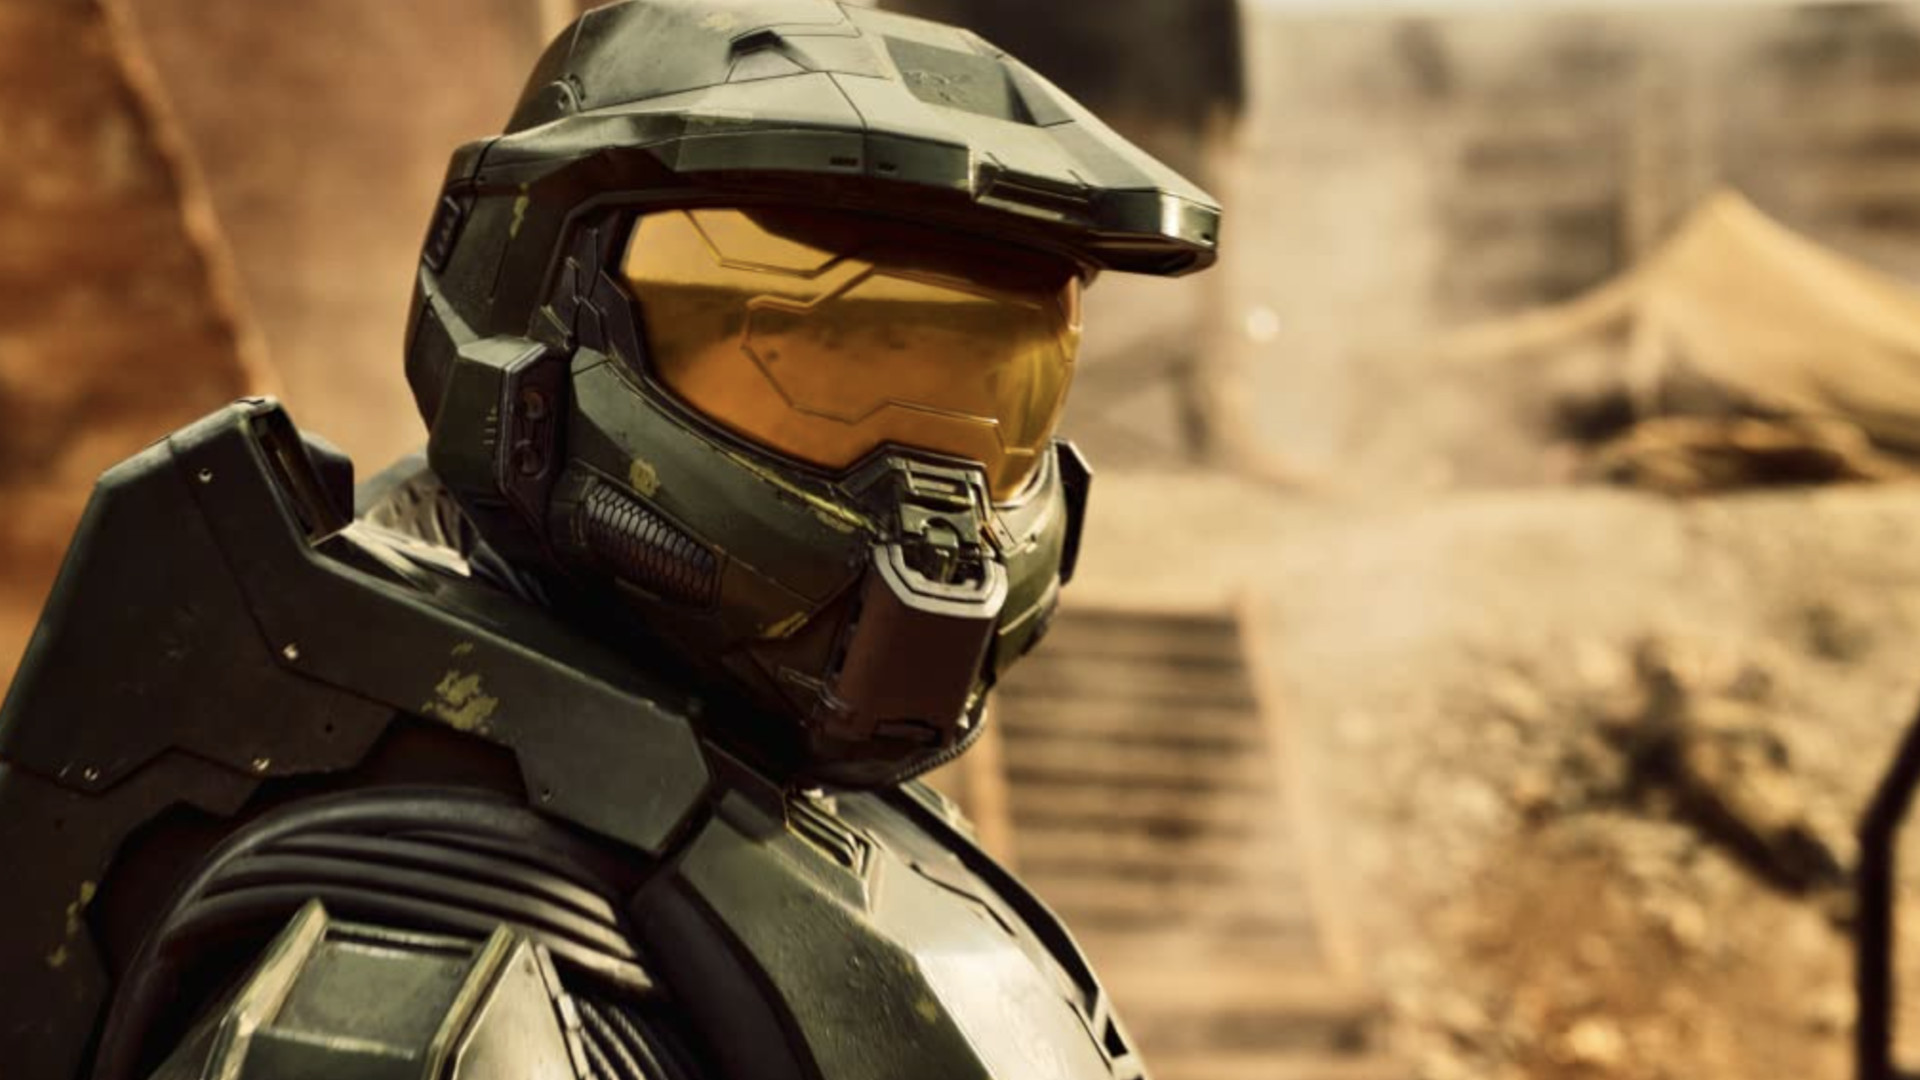 Halo TV series: Channel 5 release date, episodes, and more